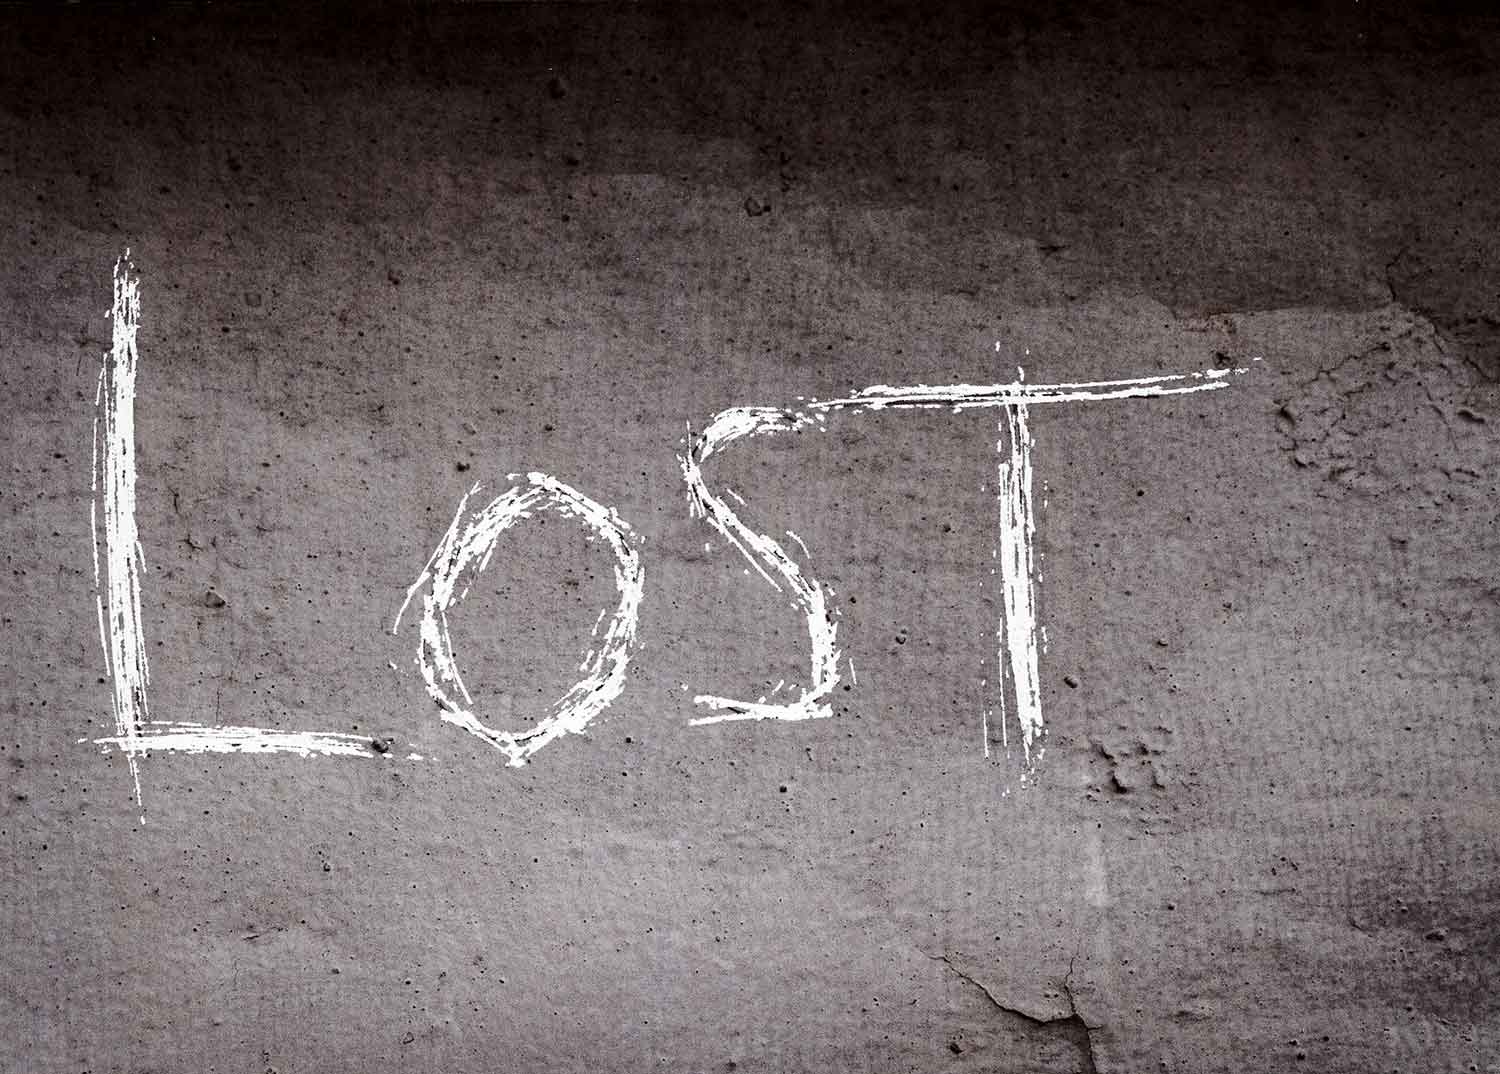 LOST - Back to the sense of feeling lost of which begins the cycle ones again.